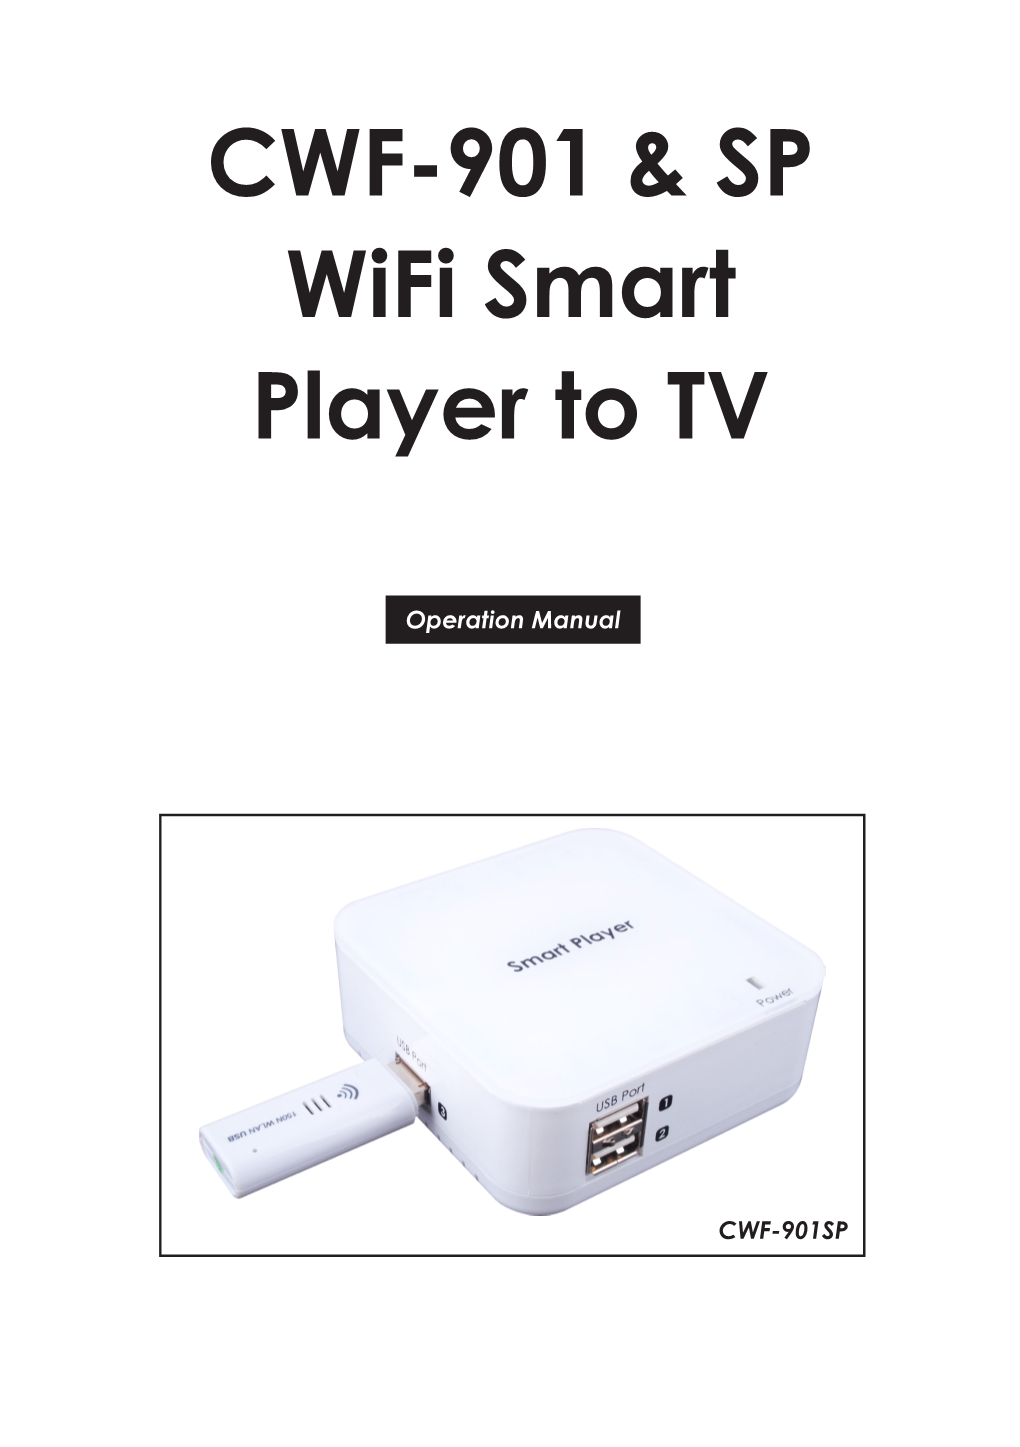 CWF-901 & SP Wifi Smart Player to TV